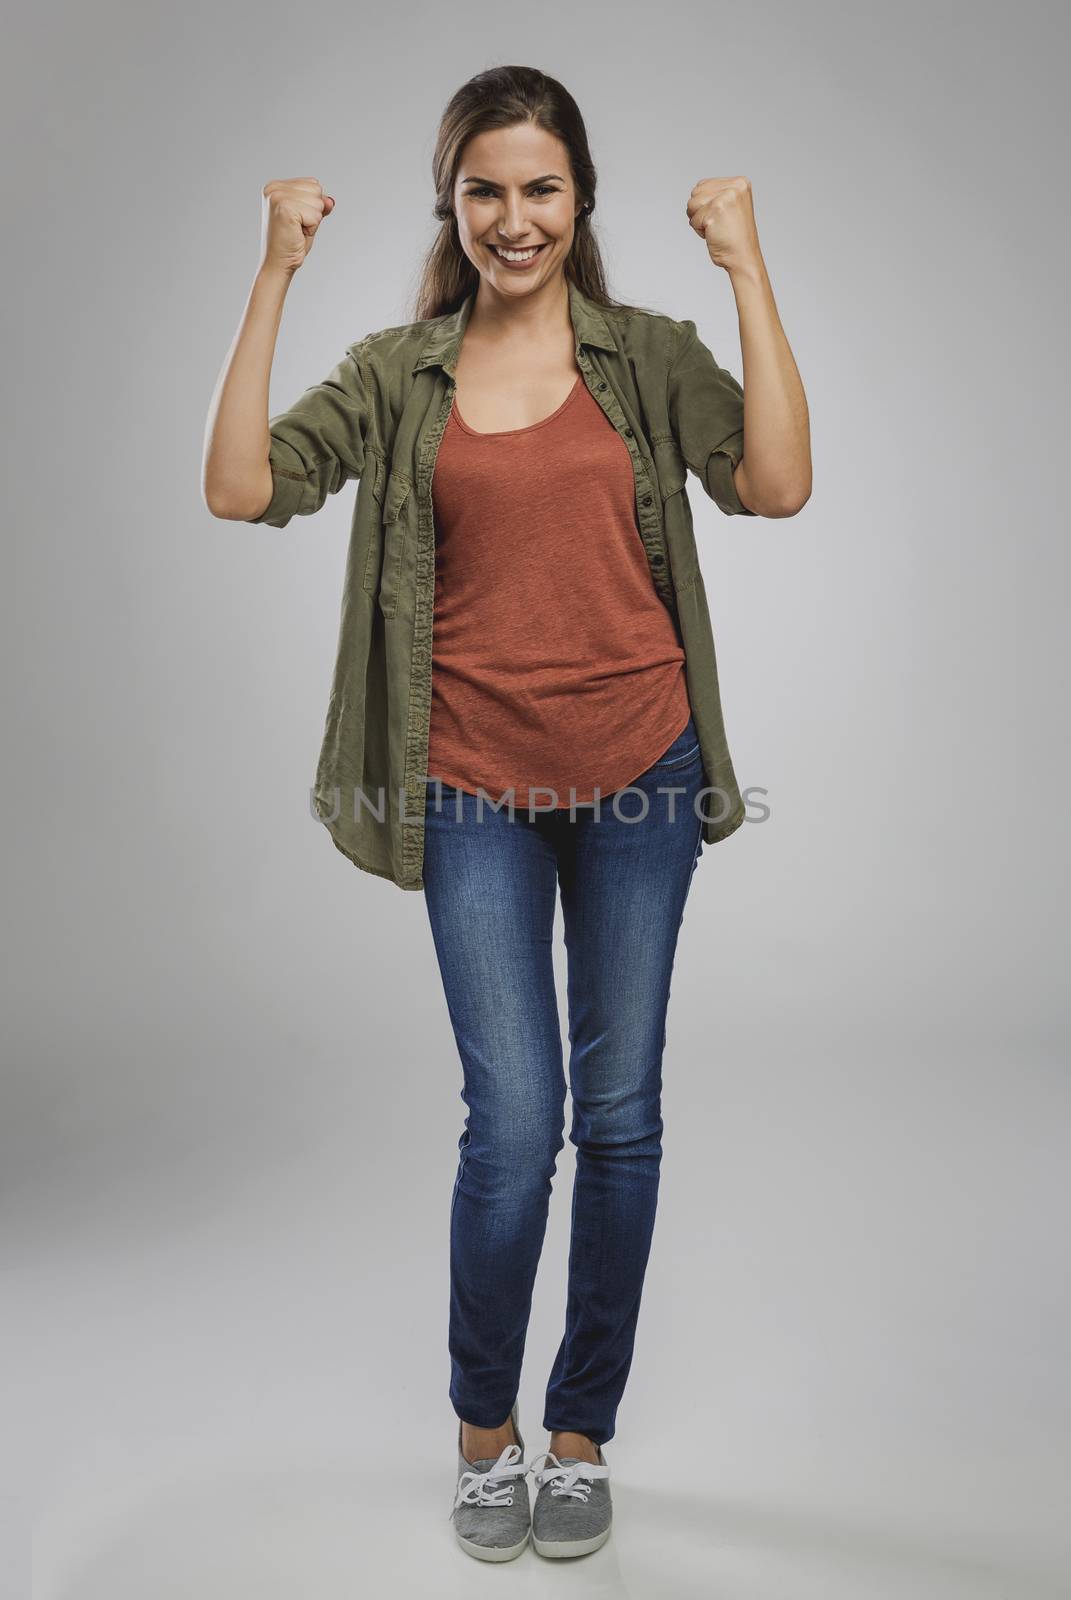 Beautiful and successful young woman with arms raised